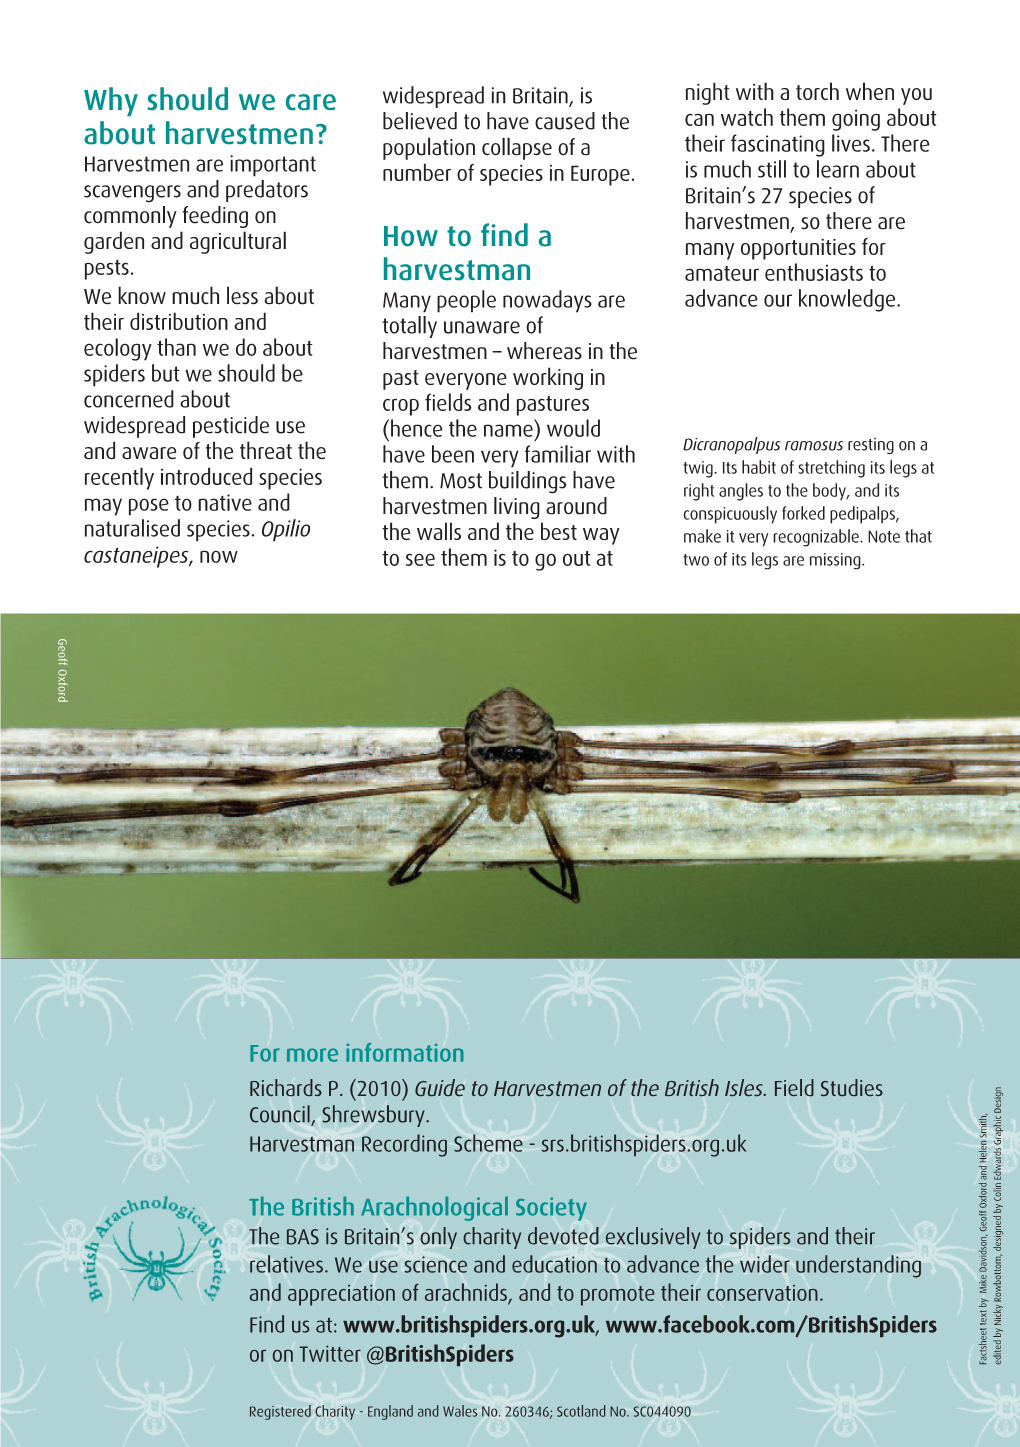 How to Find a Harvestman